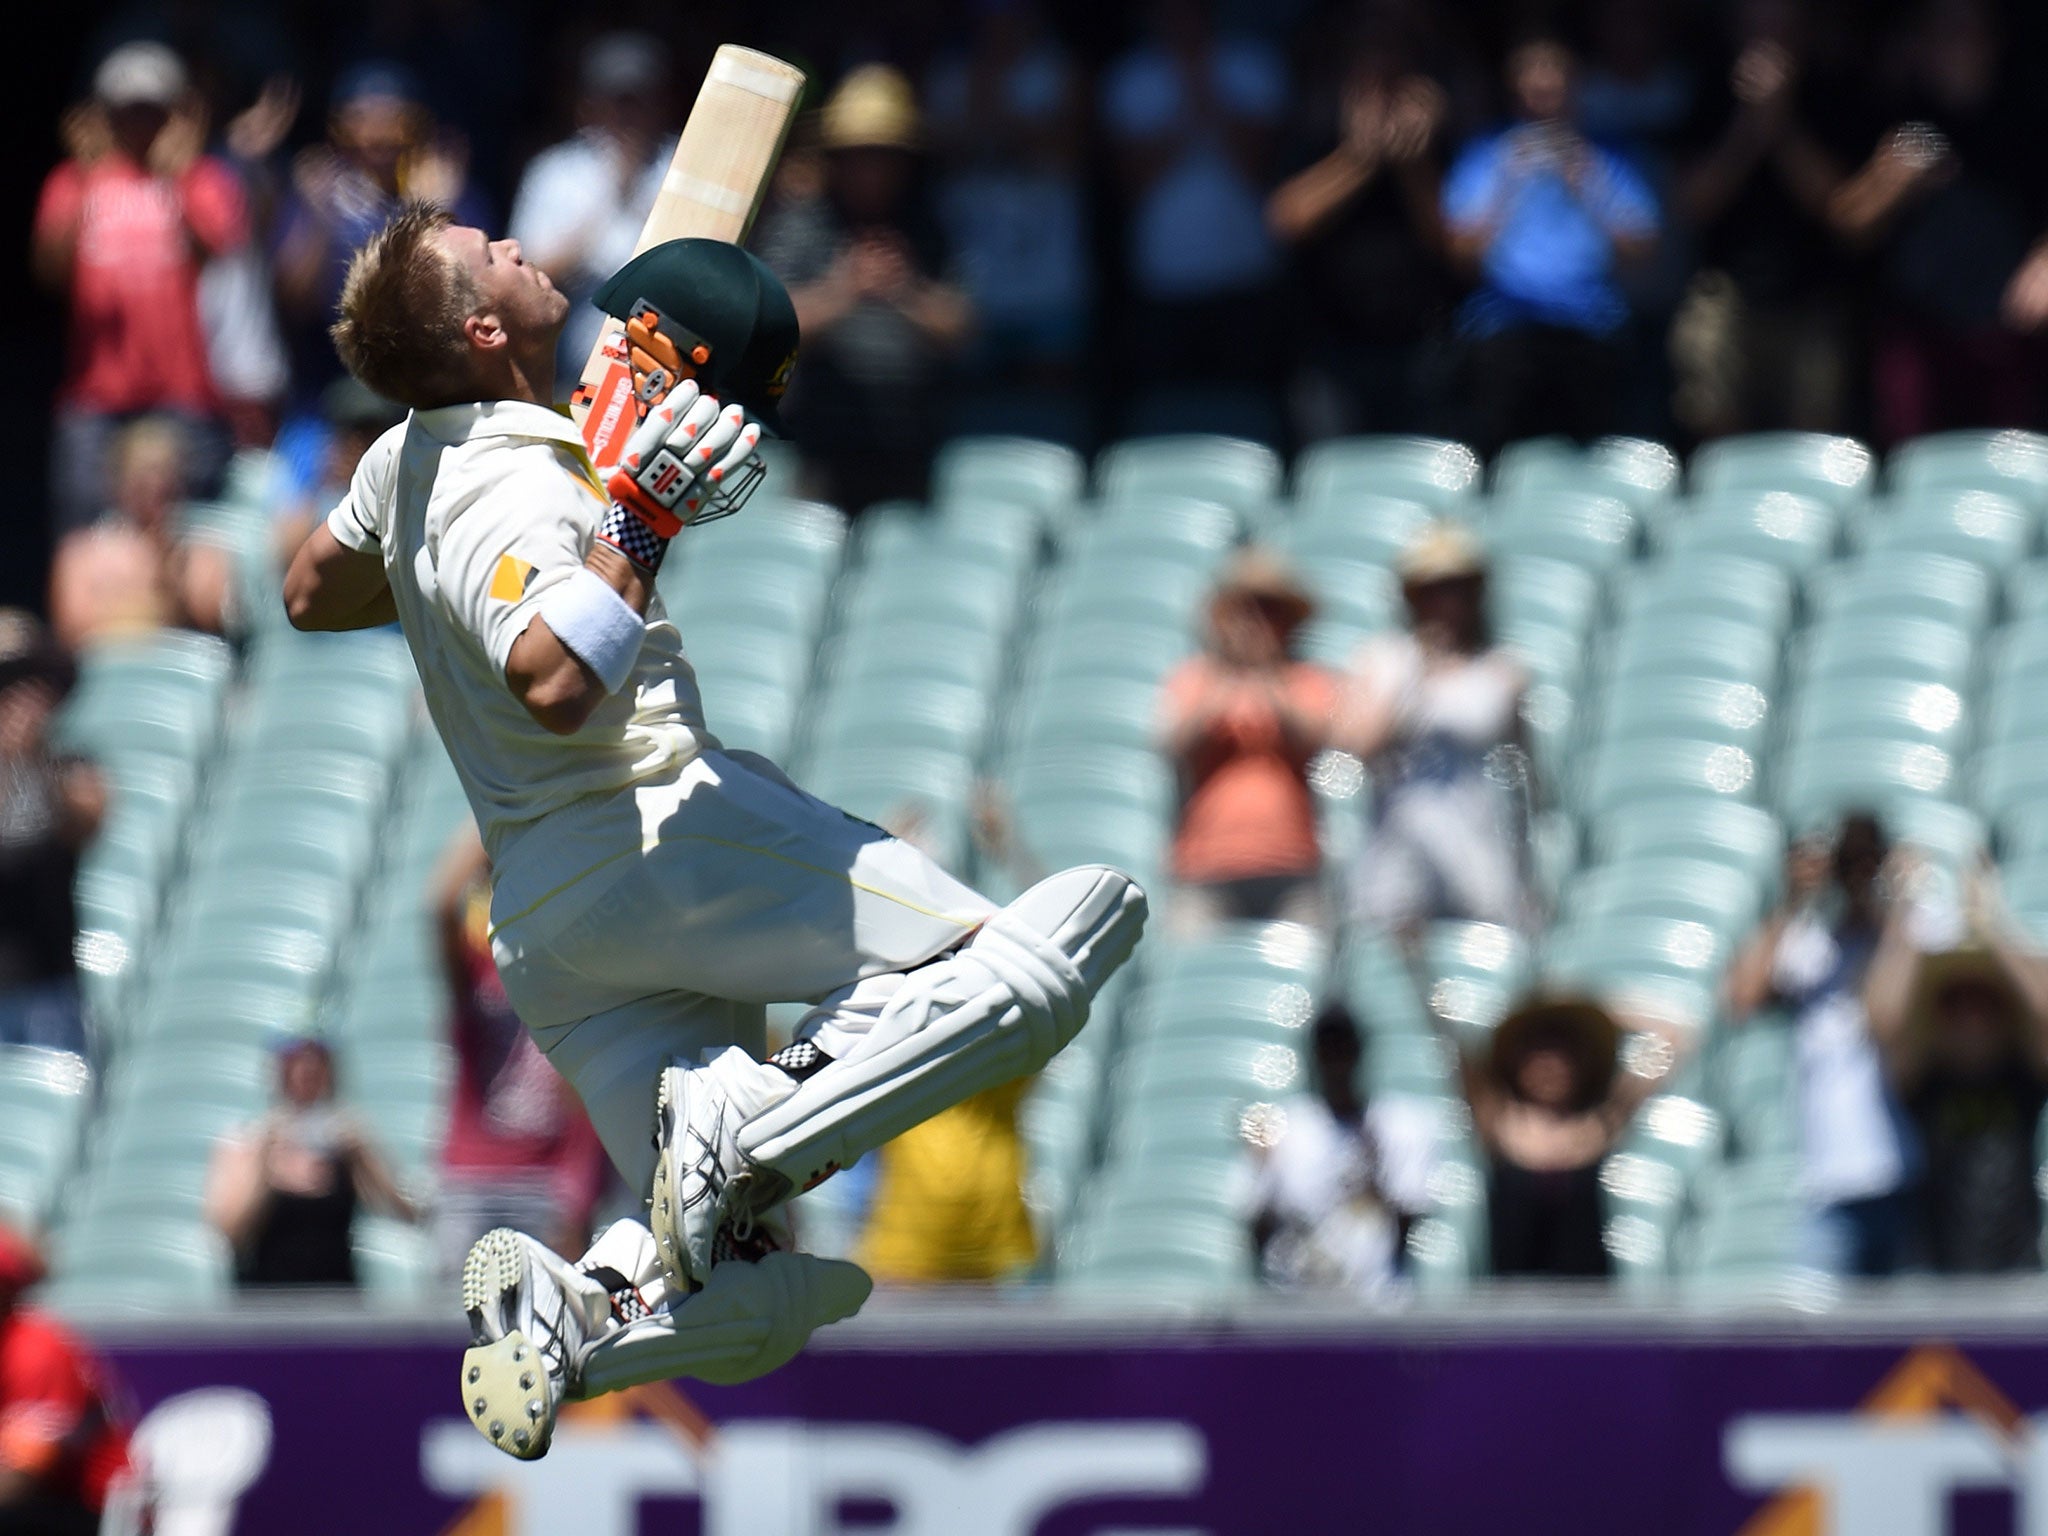 David Warner leaps for joy after reaching his century